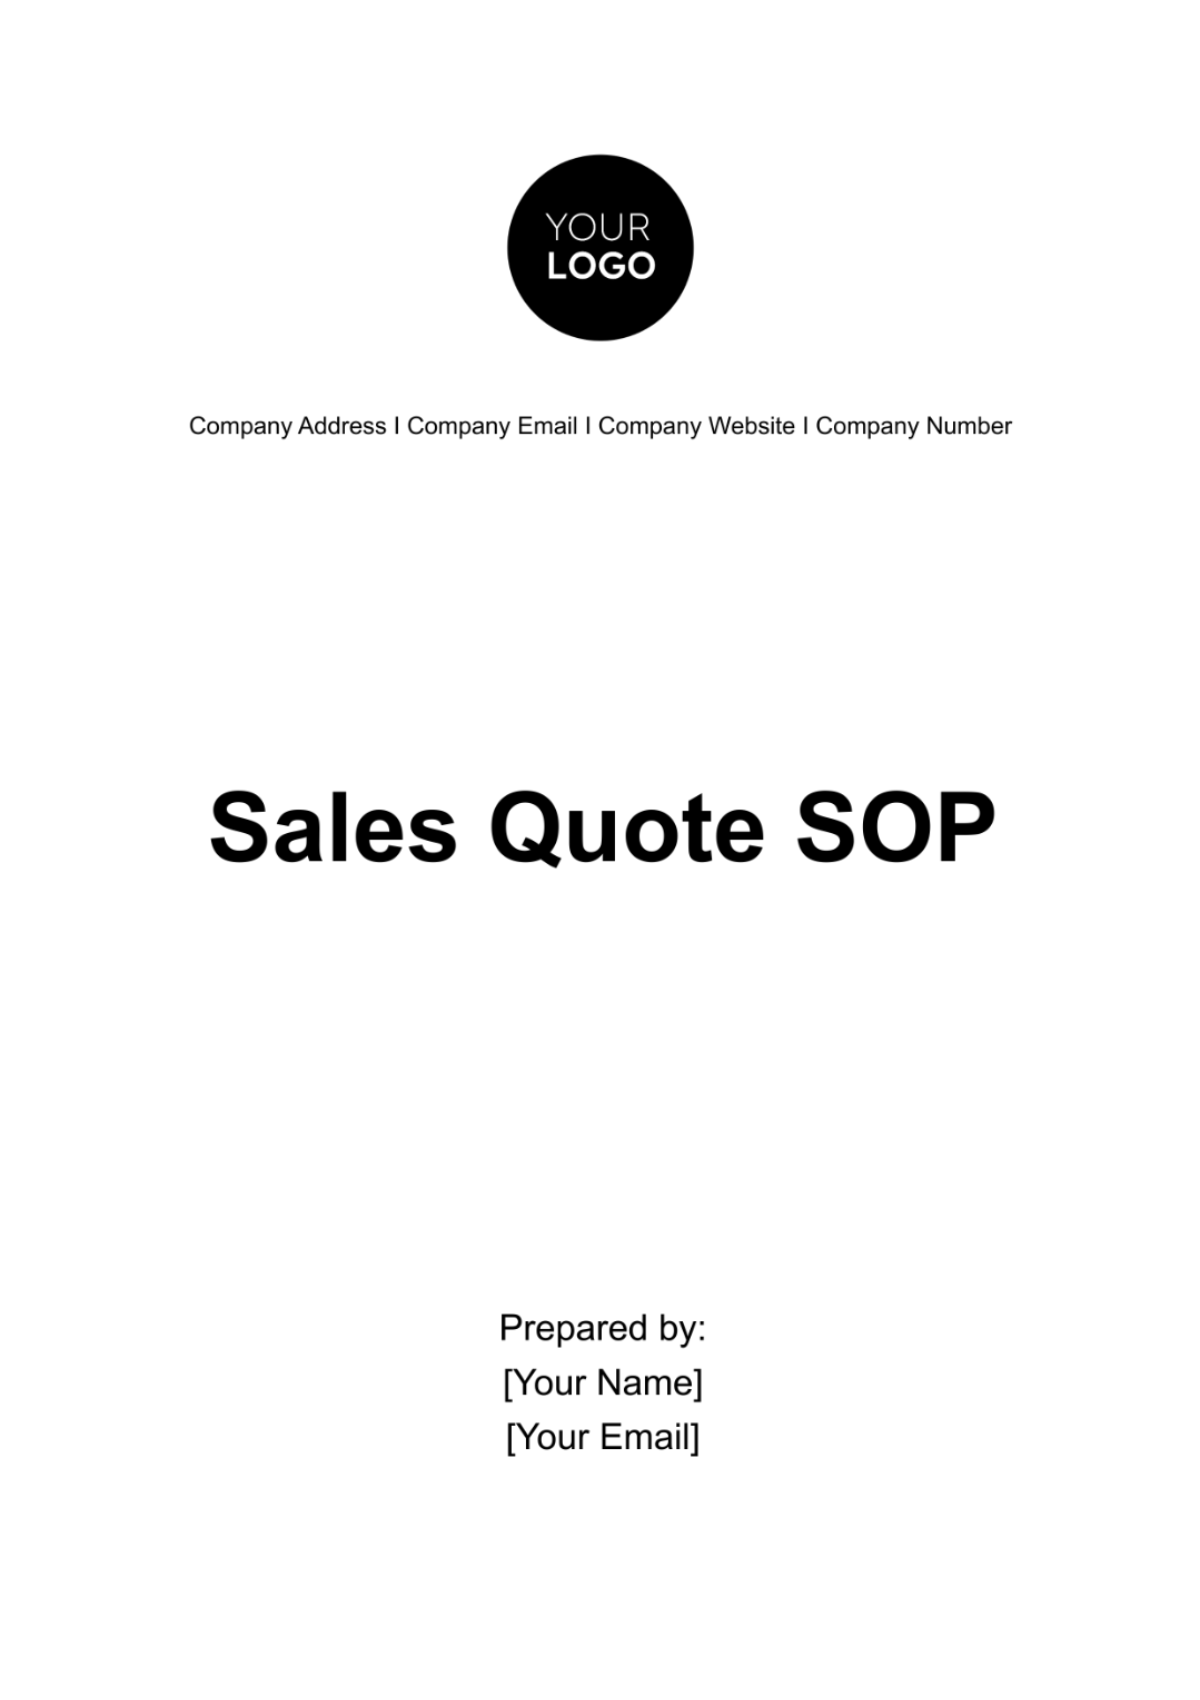 Free Sales Quote SOP Template